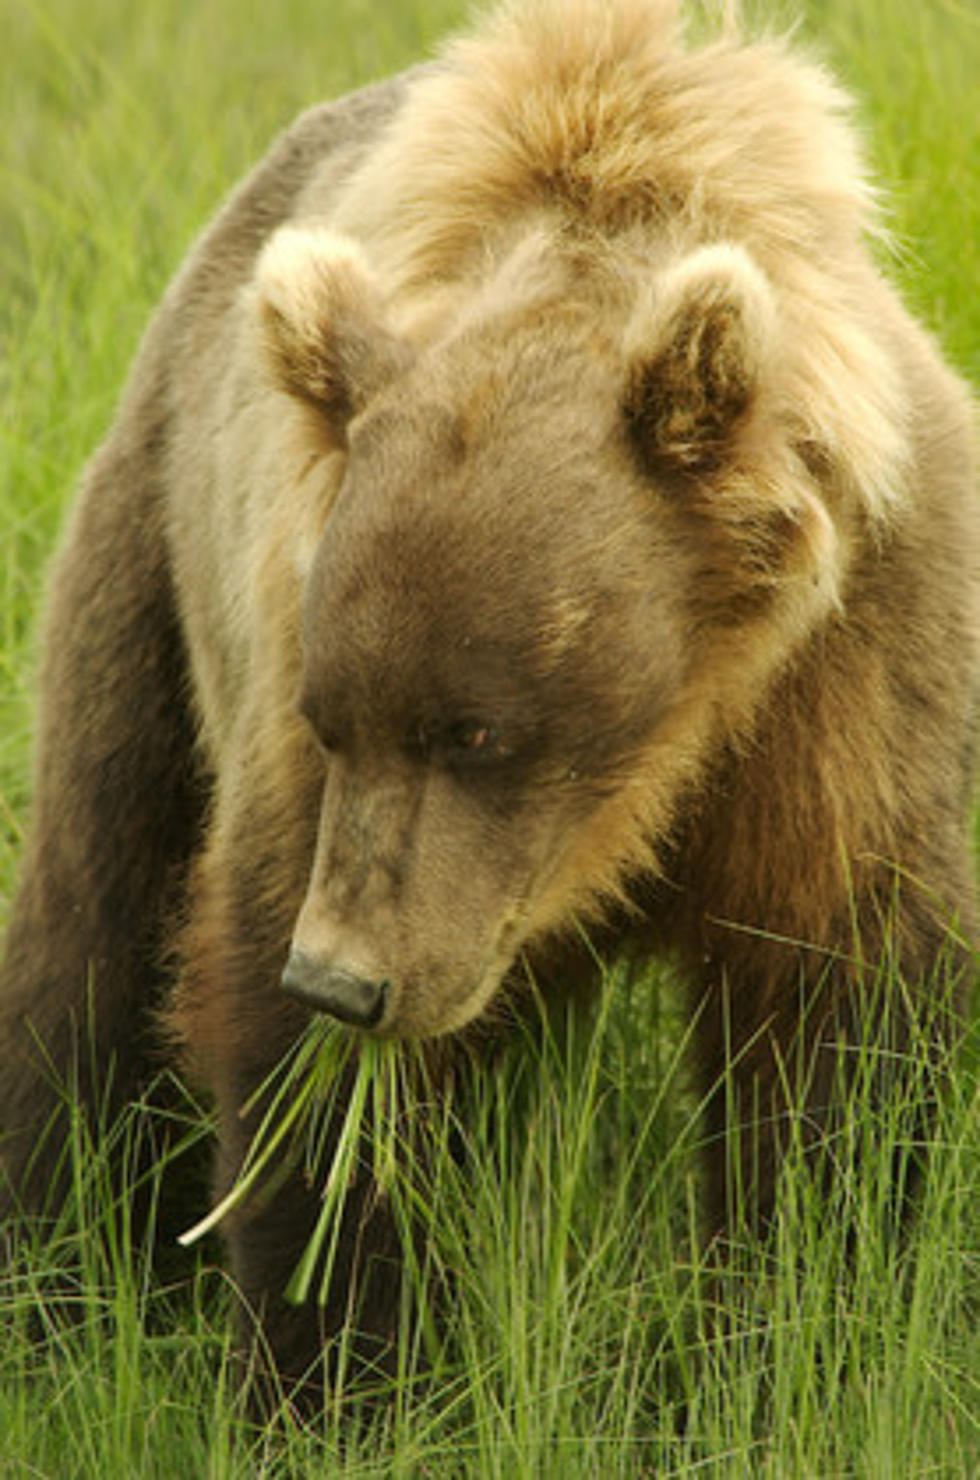 East Idaho Grizzly Euthanized, Cubs Being Evaluated